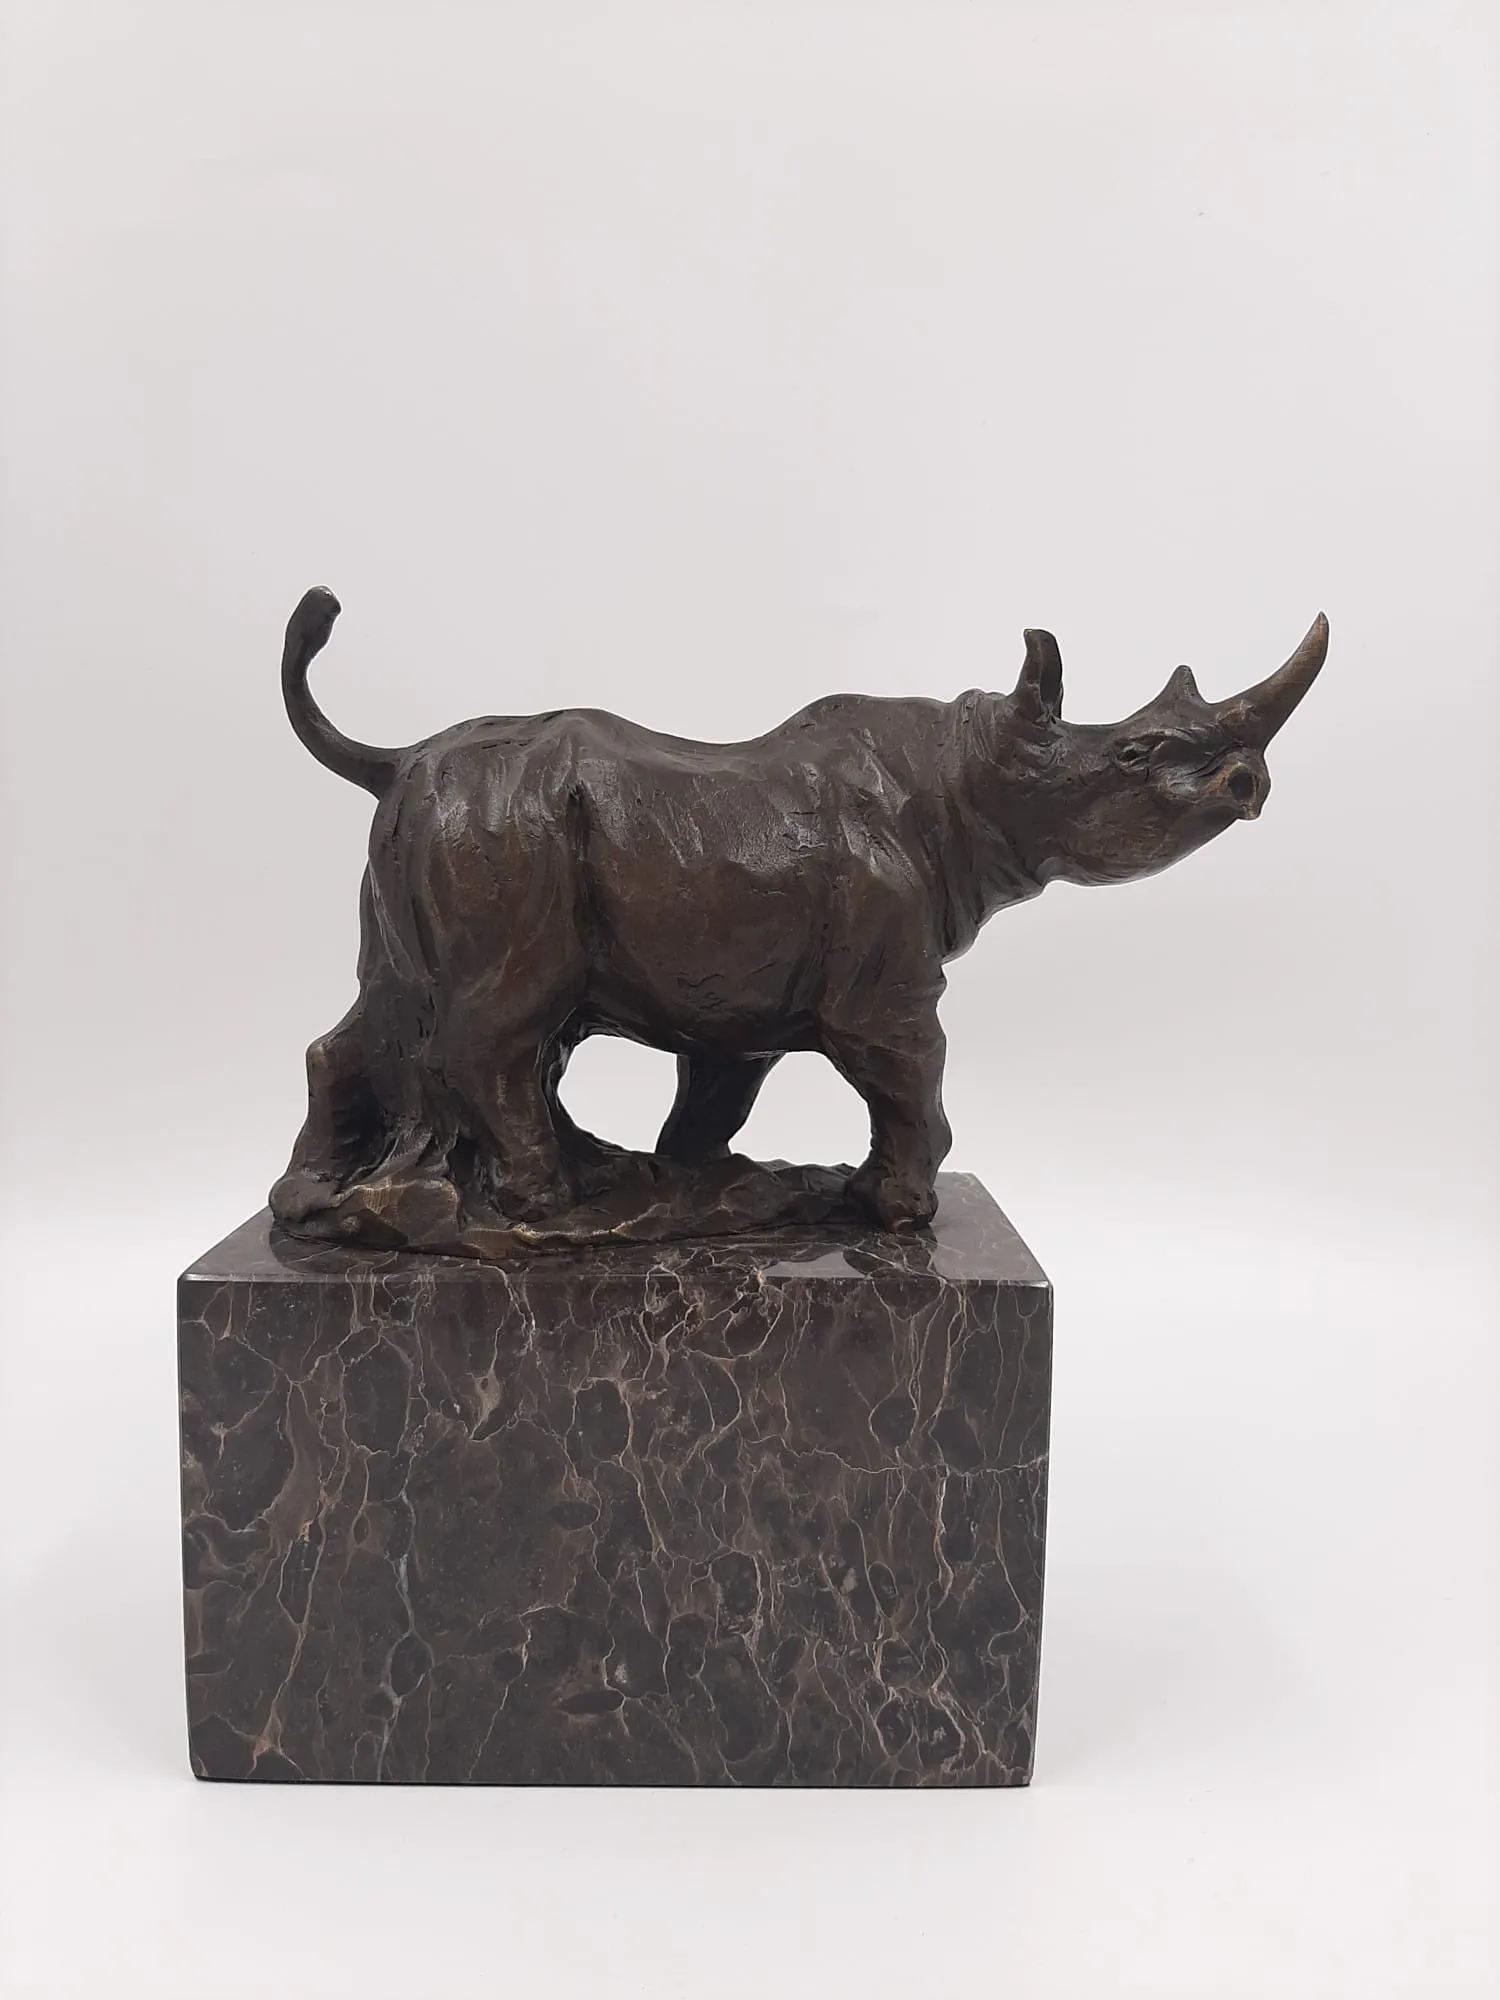 Modern Quality Bronze Sculpture of a Rhino on Marble Base